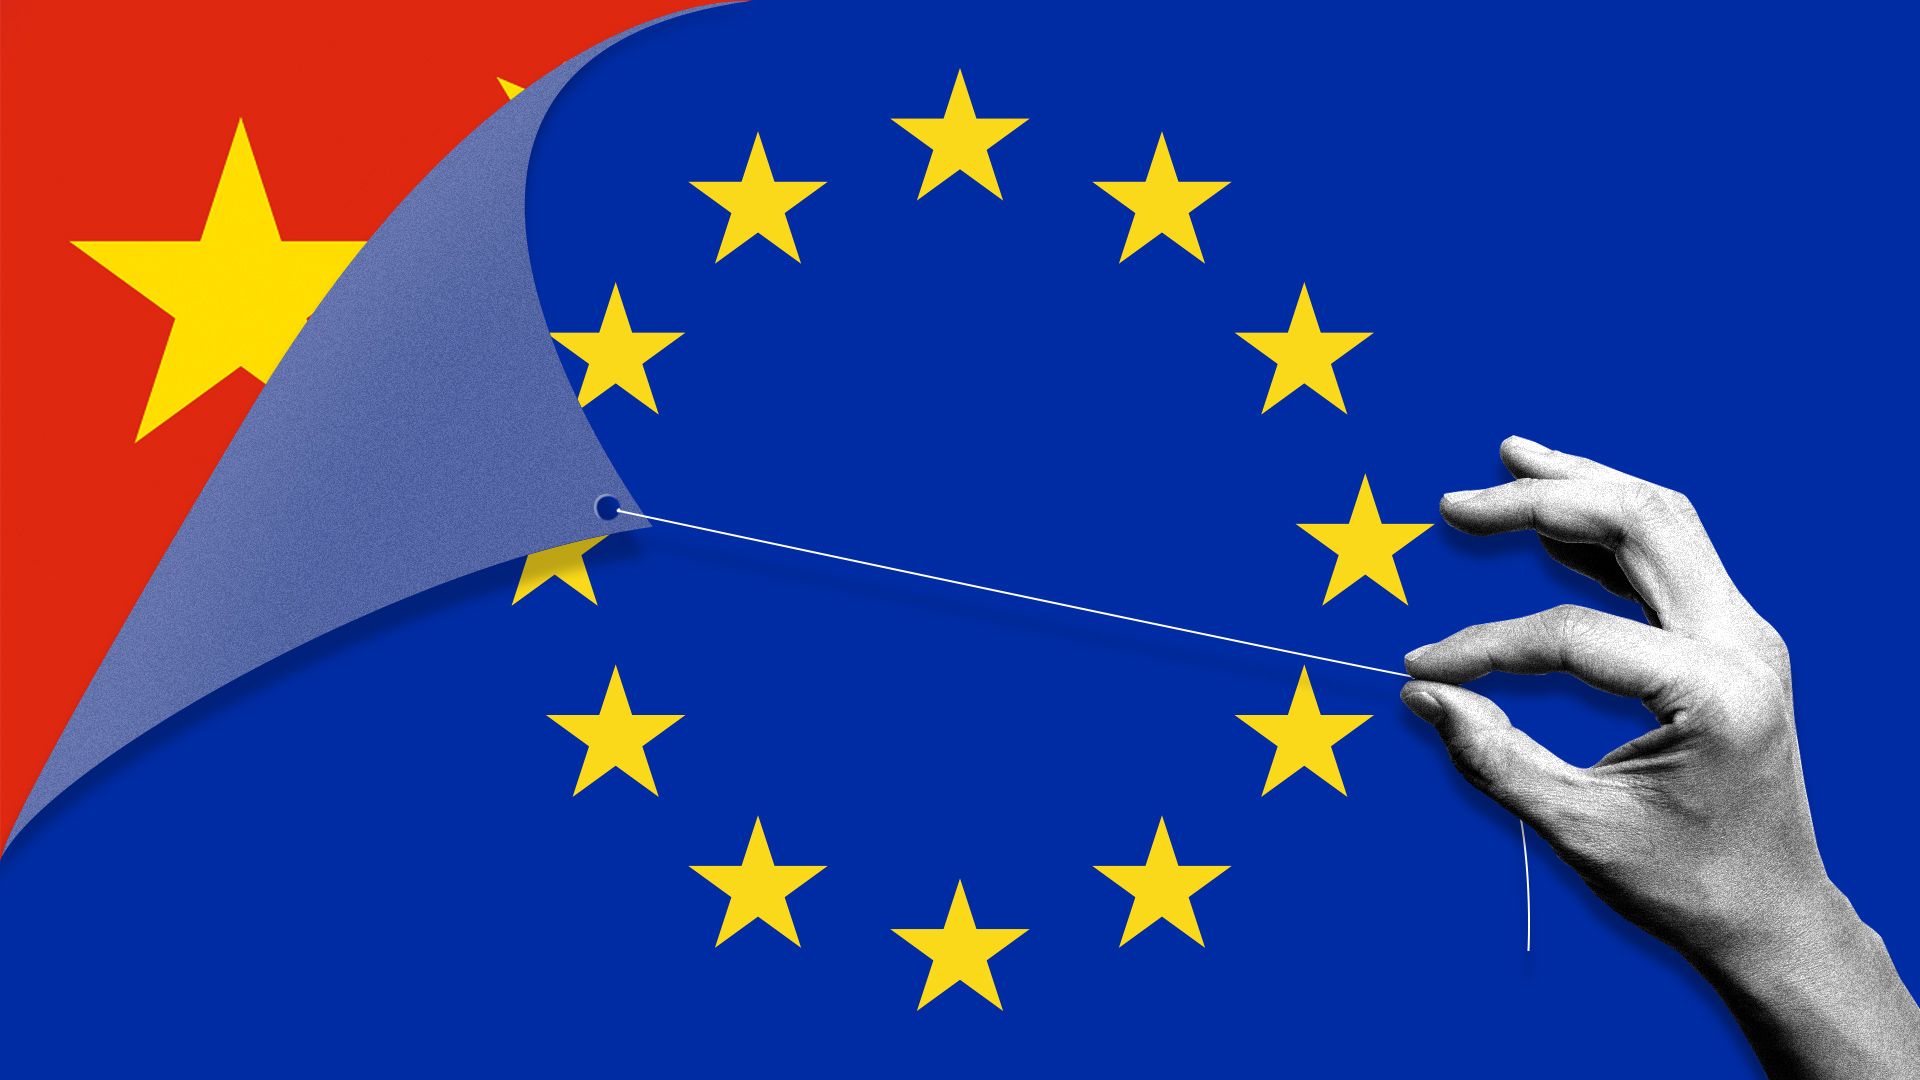 Illustration of a hand pulling back an EU flag to reveal a Chinese one.